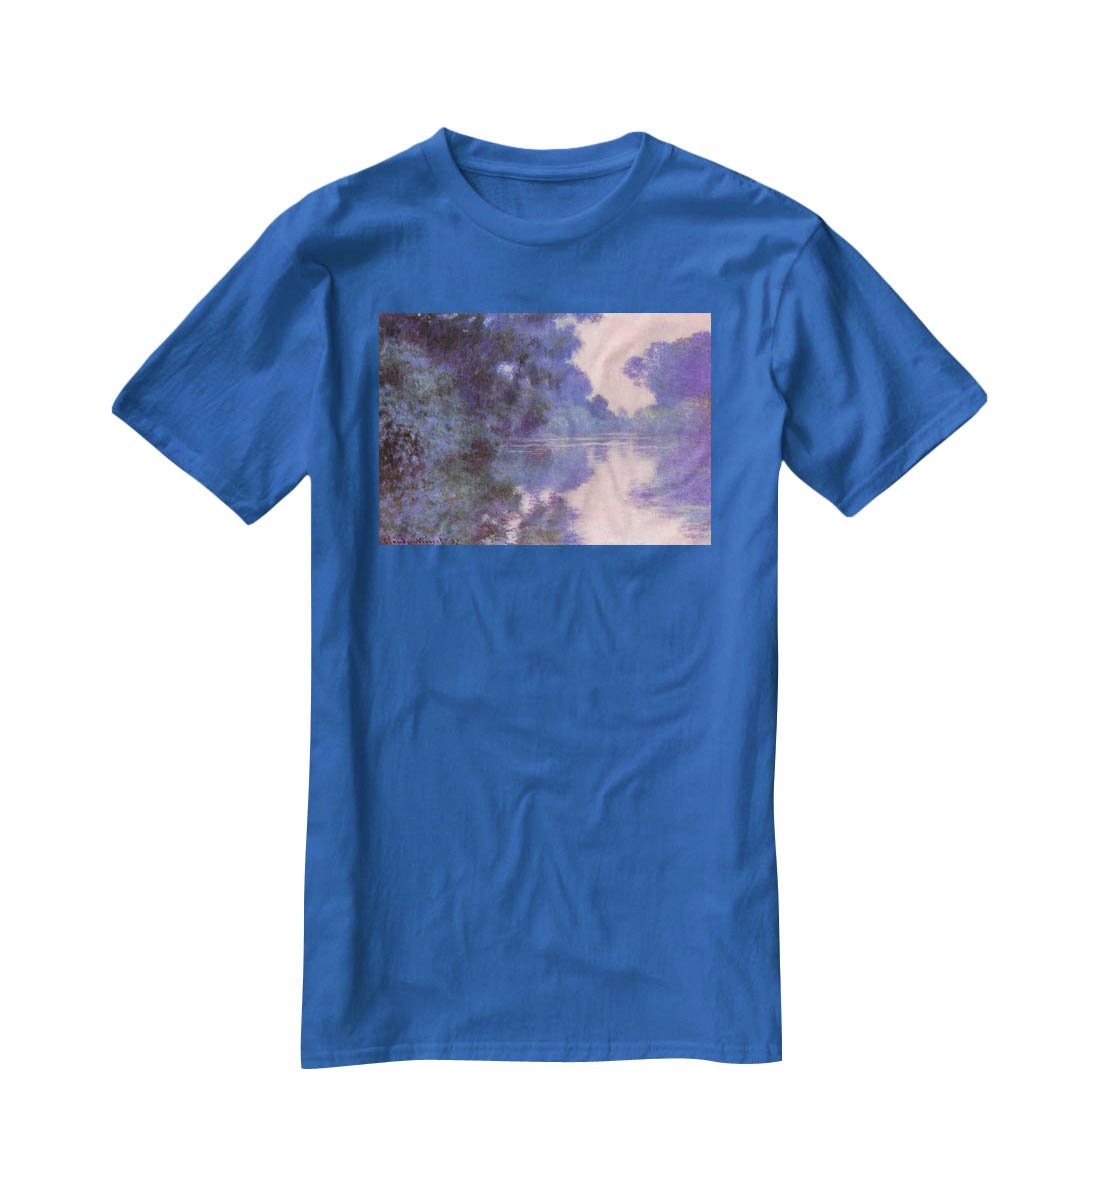 Seine arm at Giverny by Monet T-Shirt - Canvas Art Rocks - 2